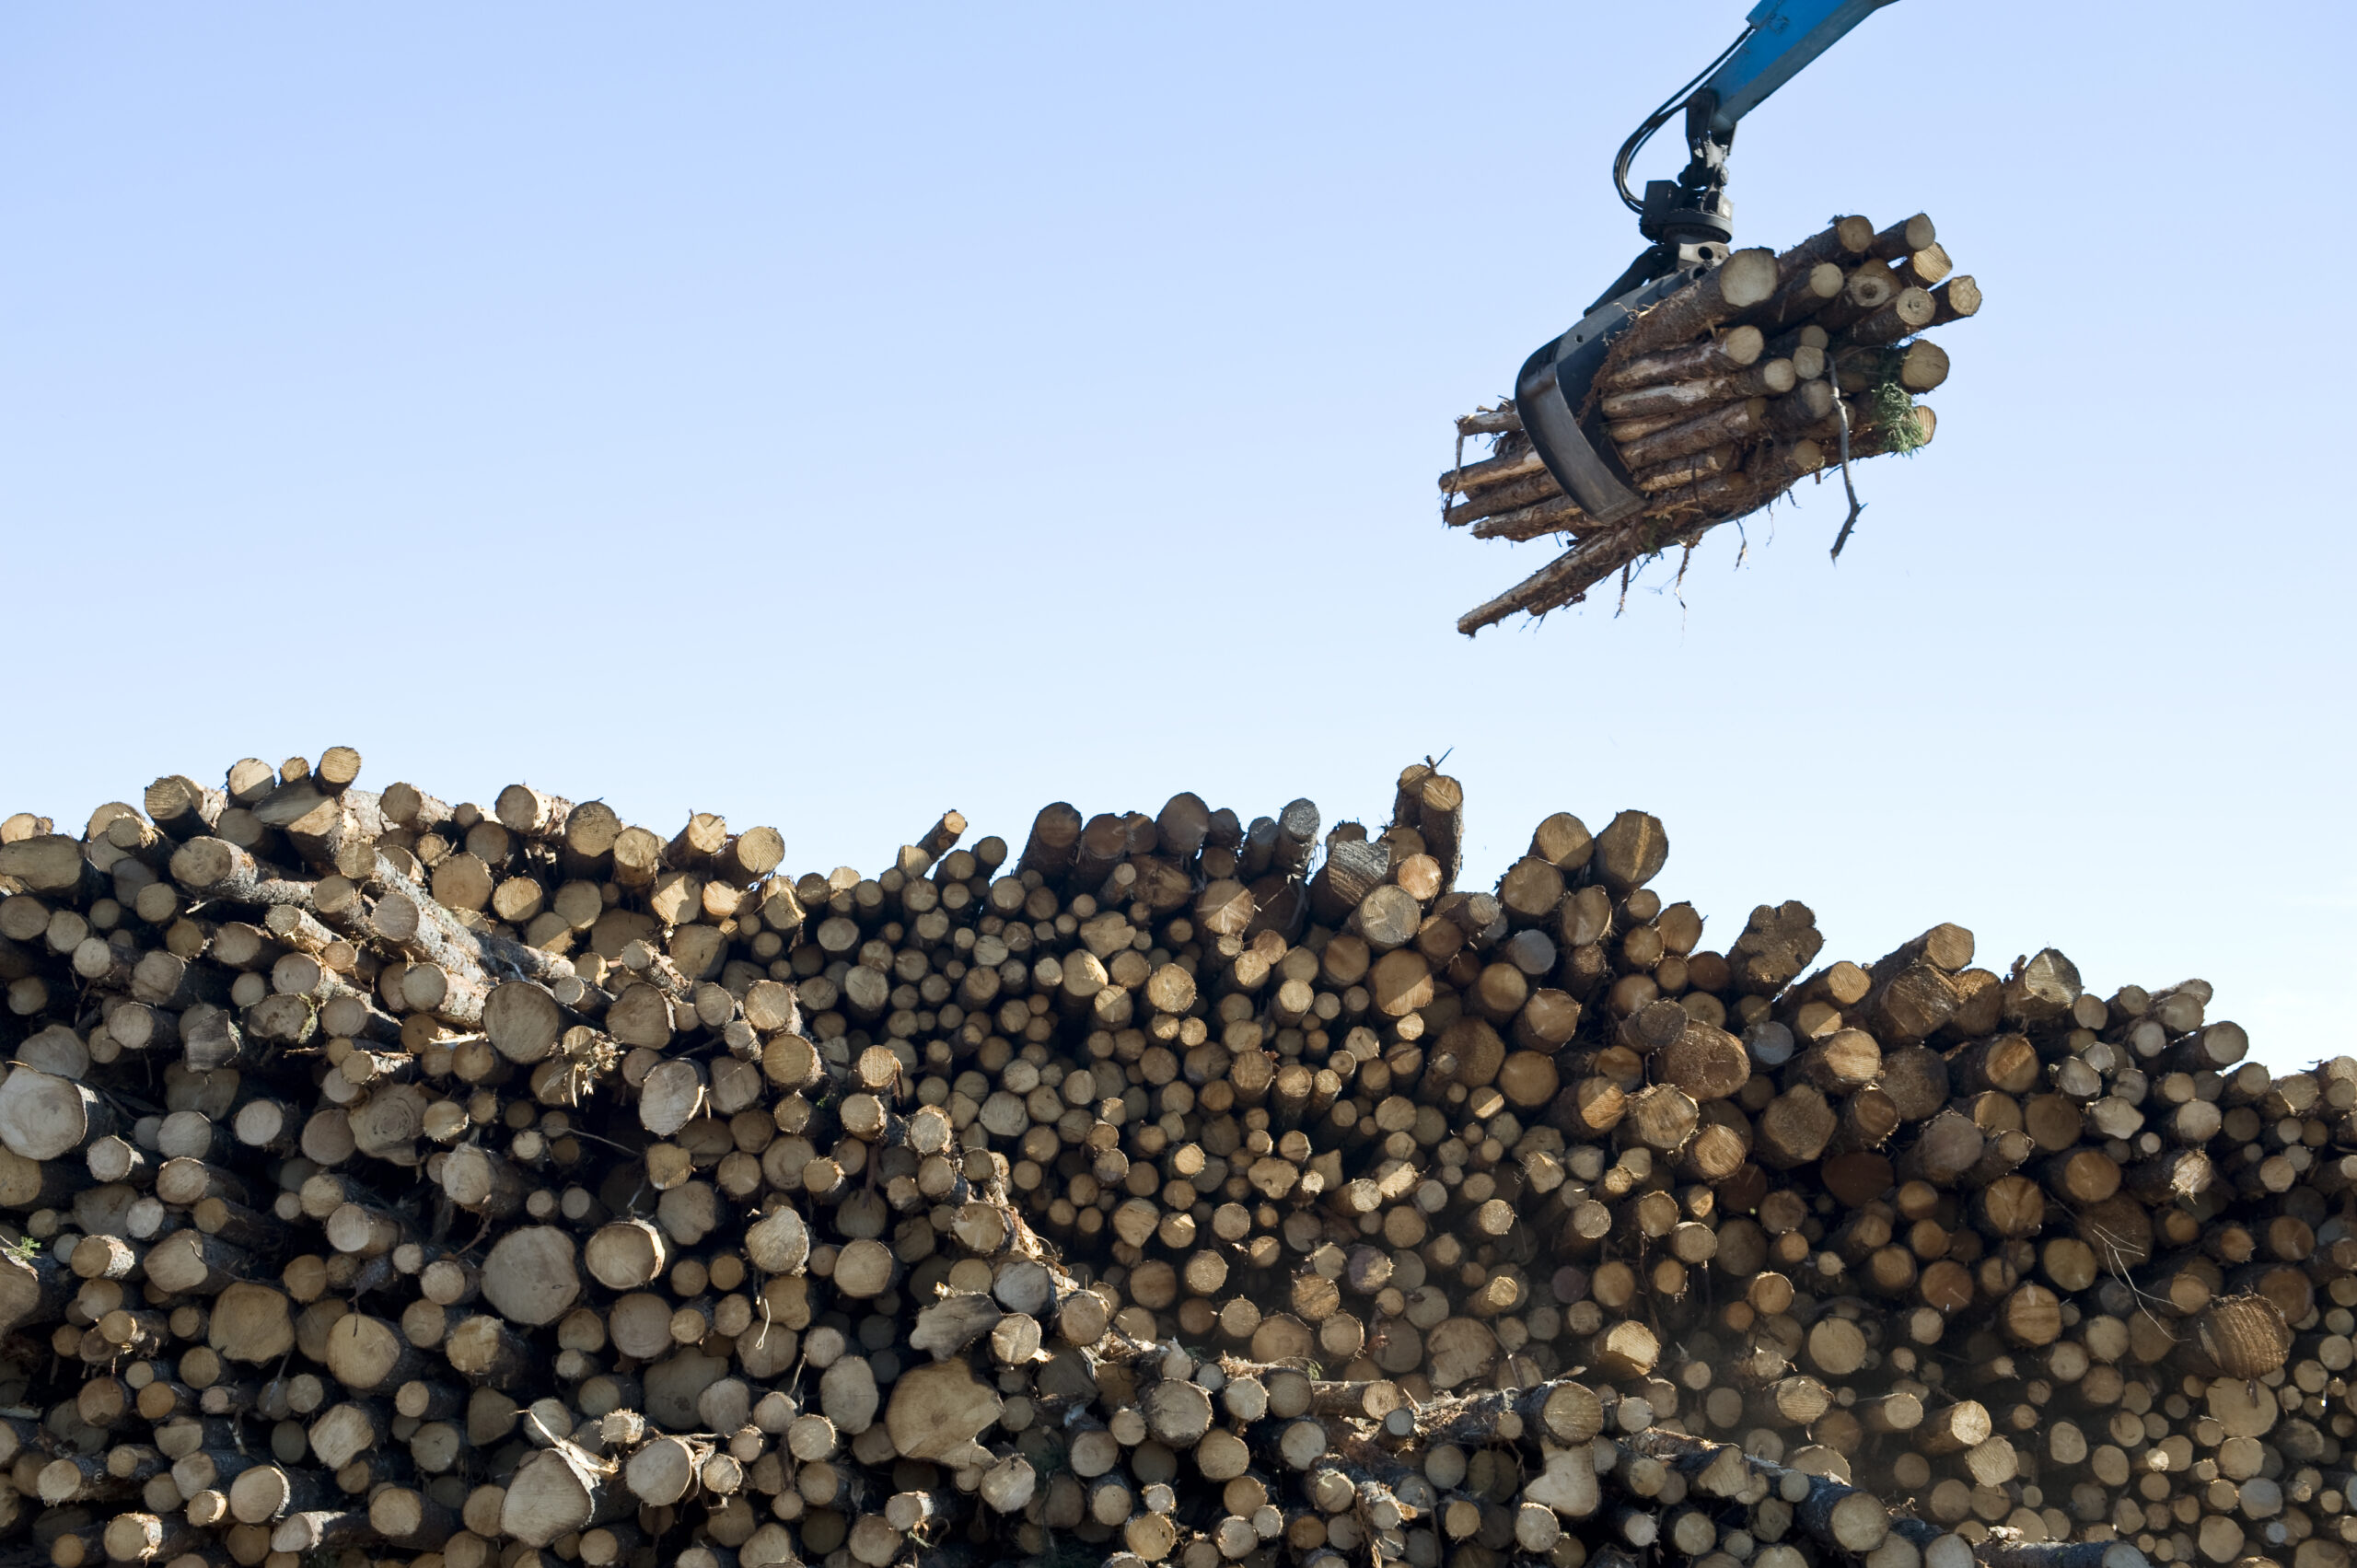 a bundle of logs being lifted by a crane above a pile of other logs